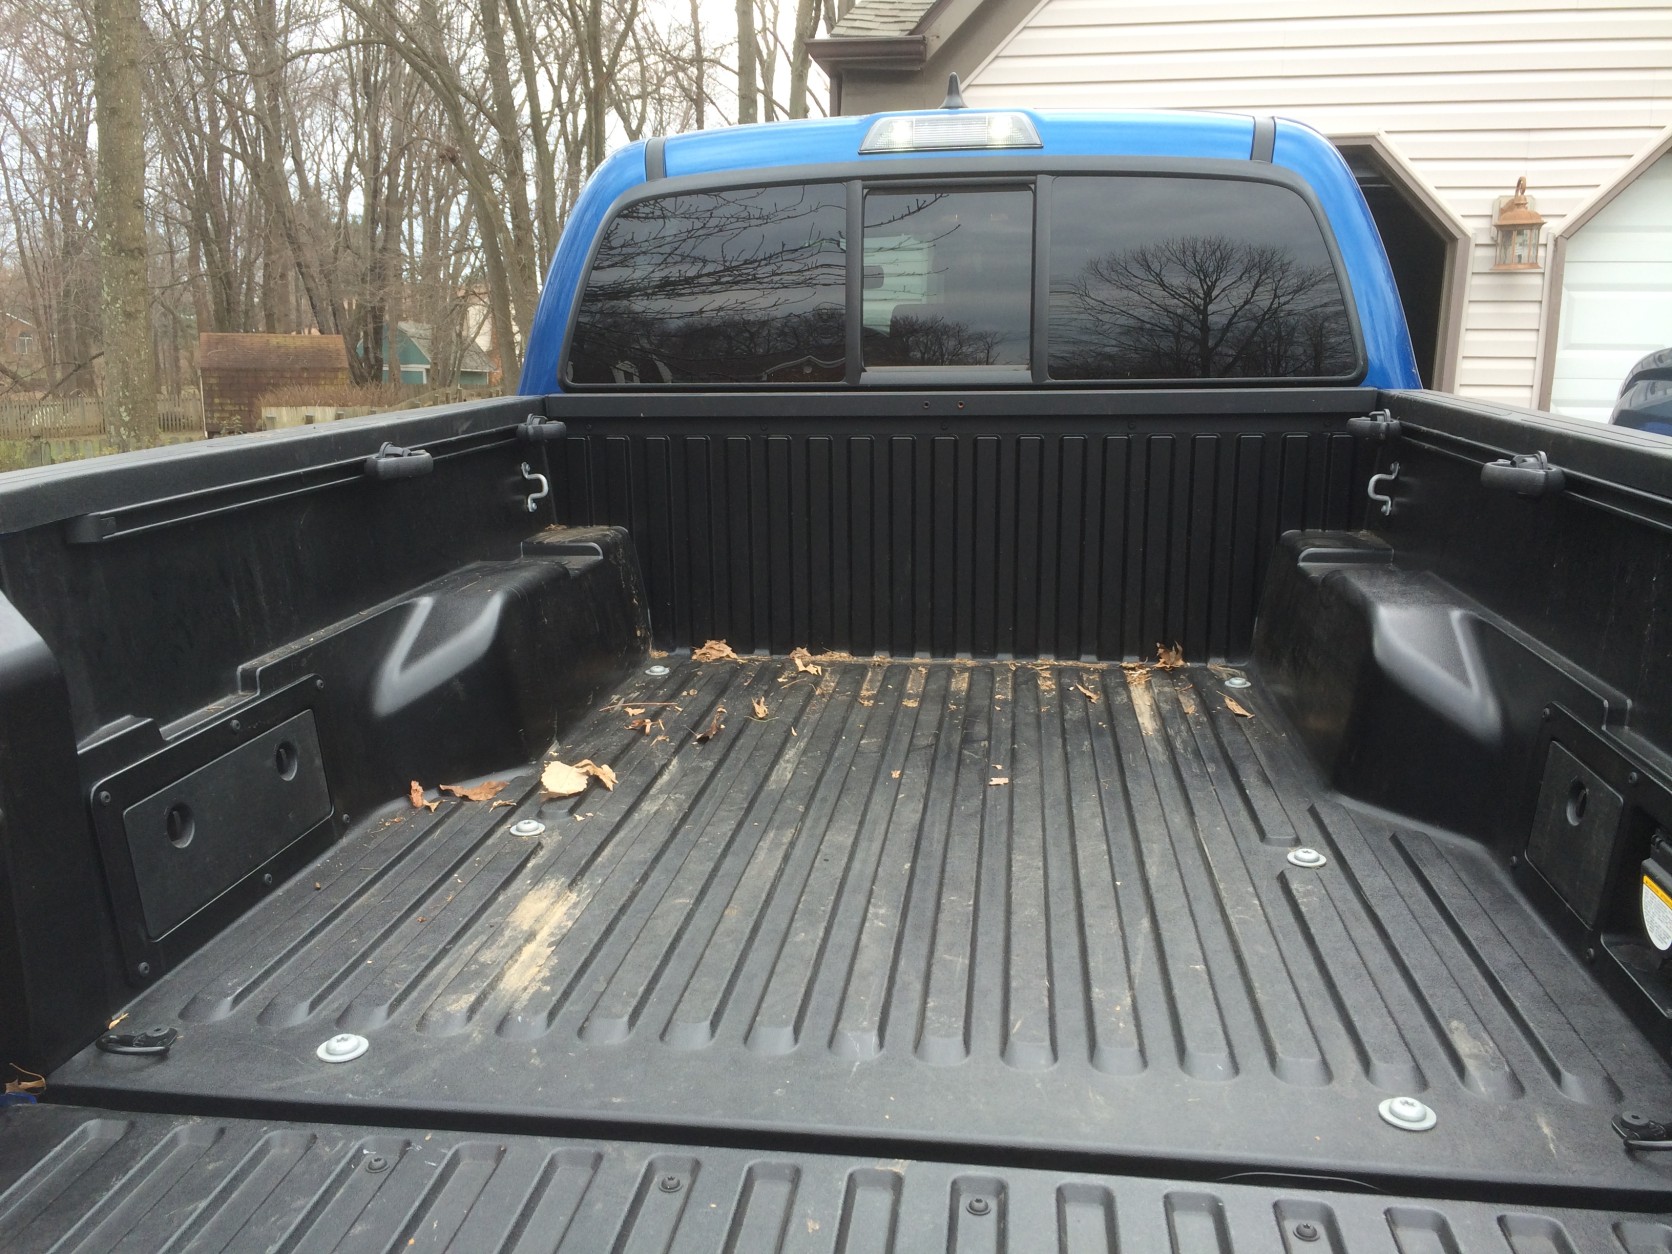 The bed has a neat cargo system with movable hooks, which helps when loading cargo and covering items you don’t want to blow away. (WTOP/Mike Parris)